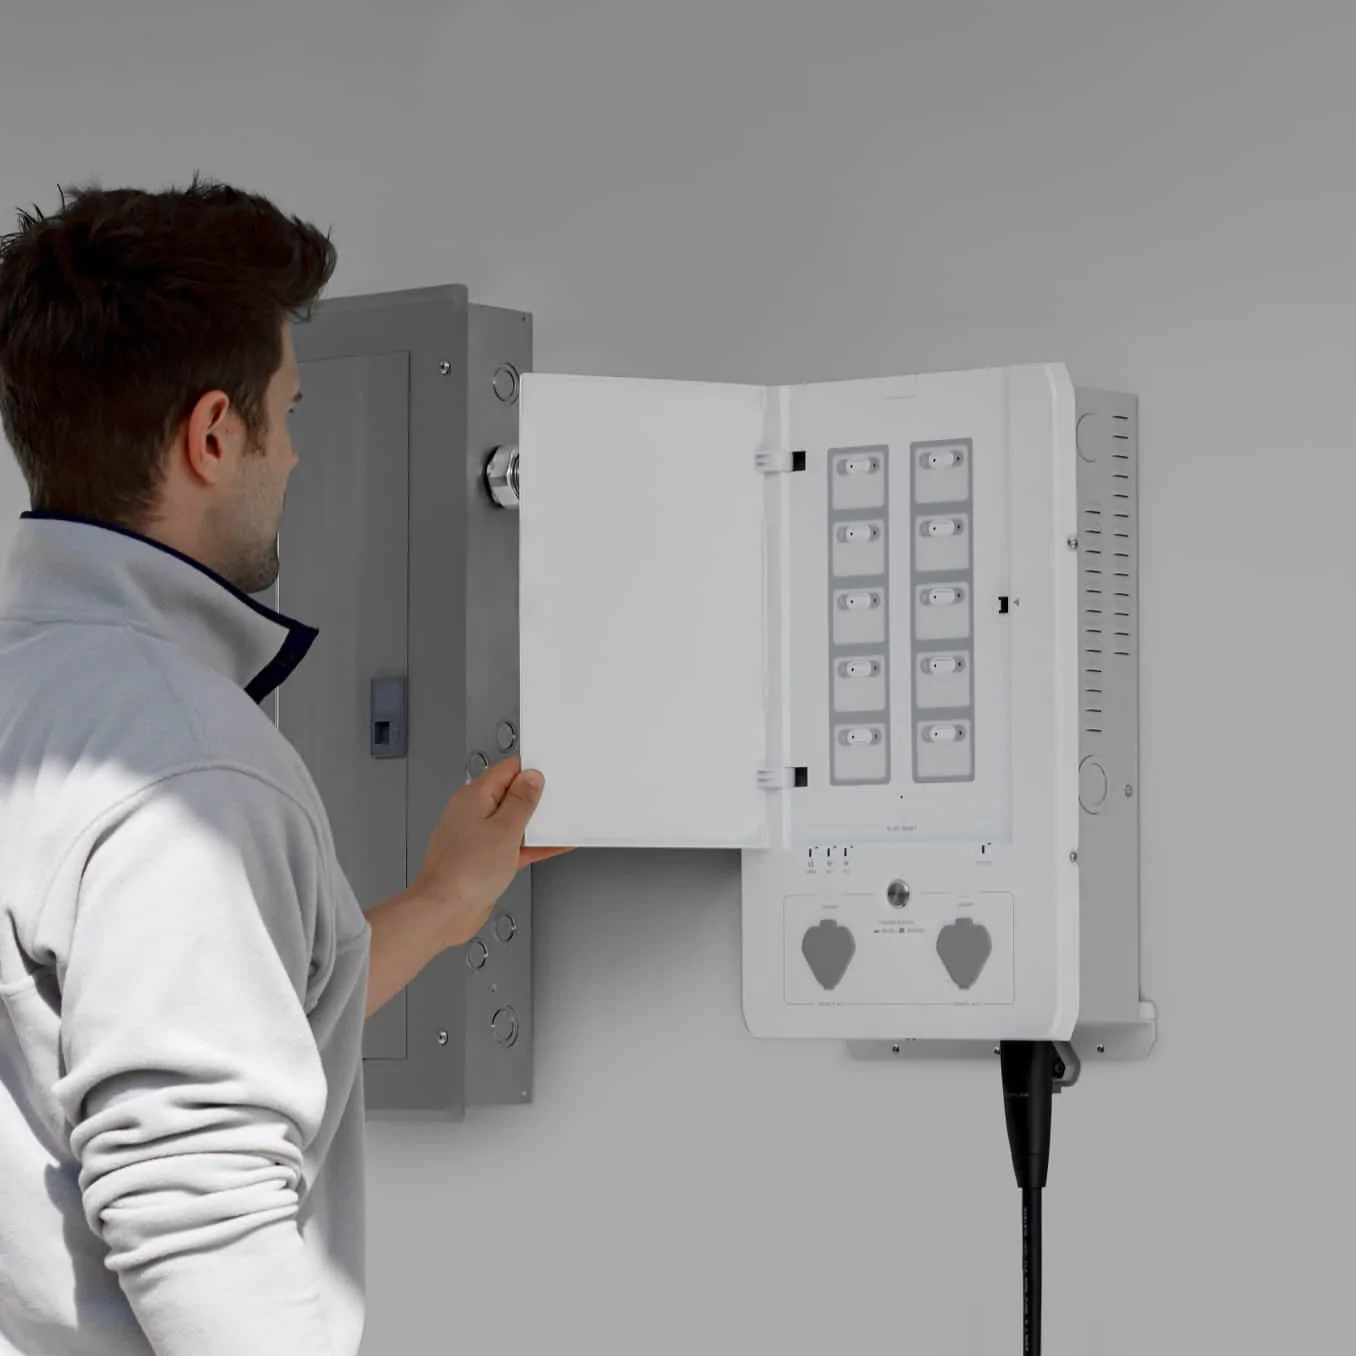 A man is installing an electrical box with the EcoFlow Smart Home Panel.